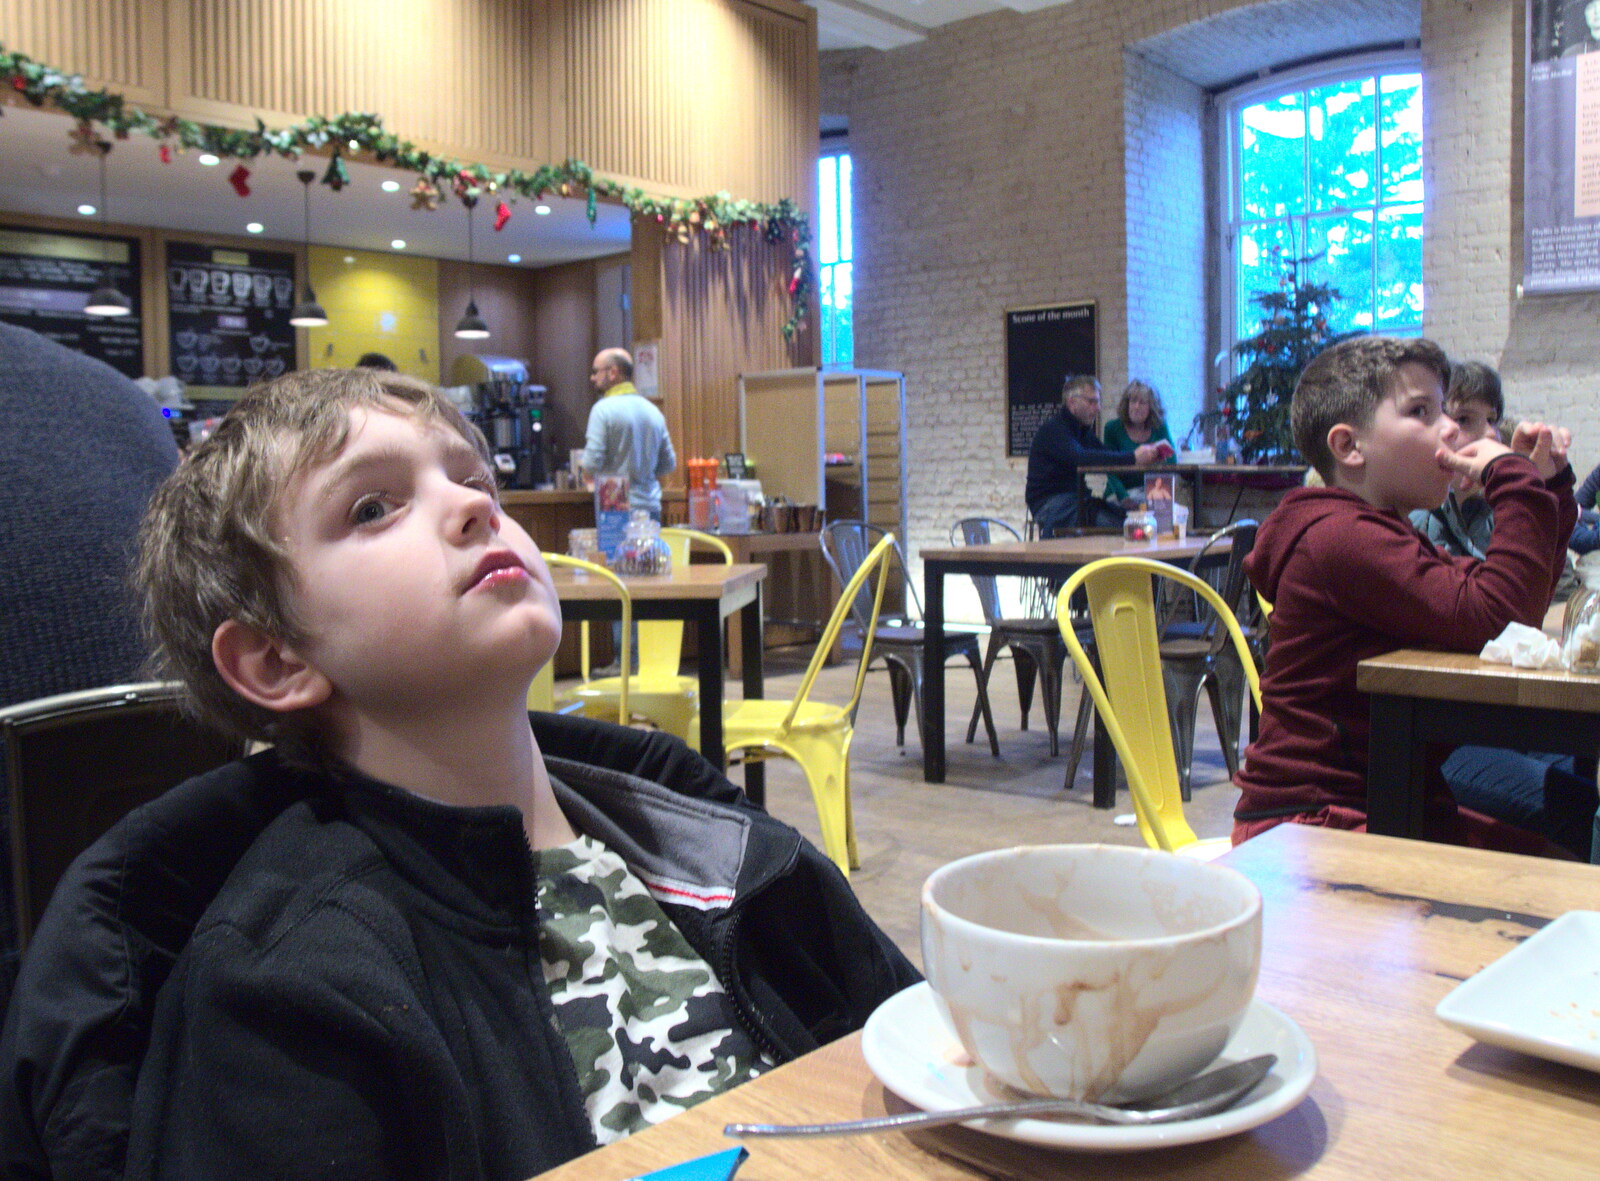 Fred's got a bit of ennui in the NT café from Ickworth House, Horringer, Suffolk - 29th December 2018